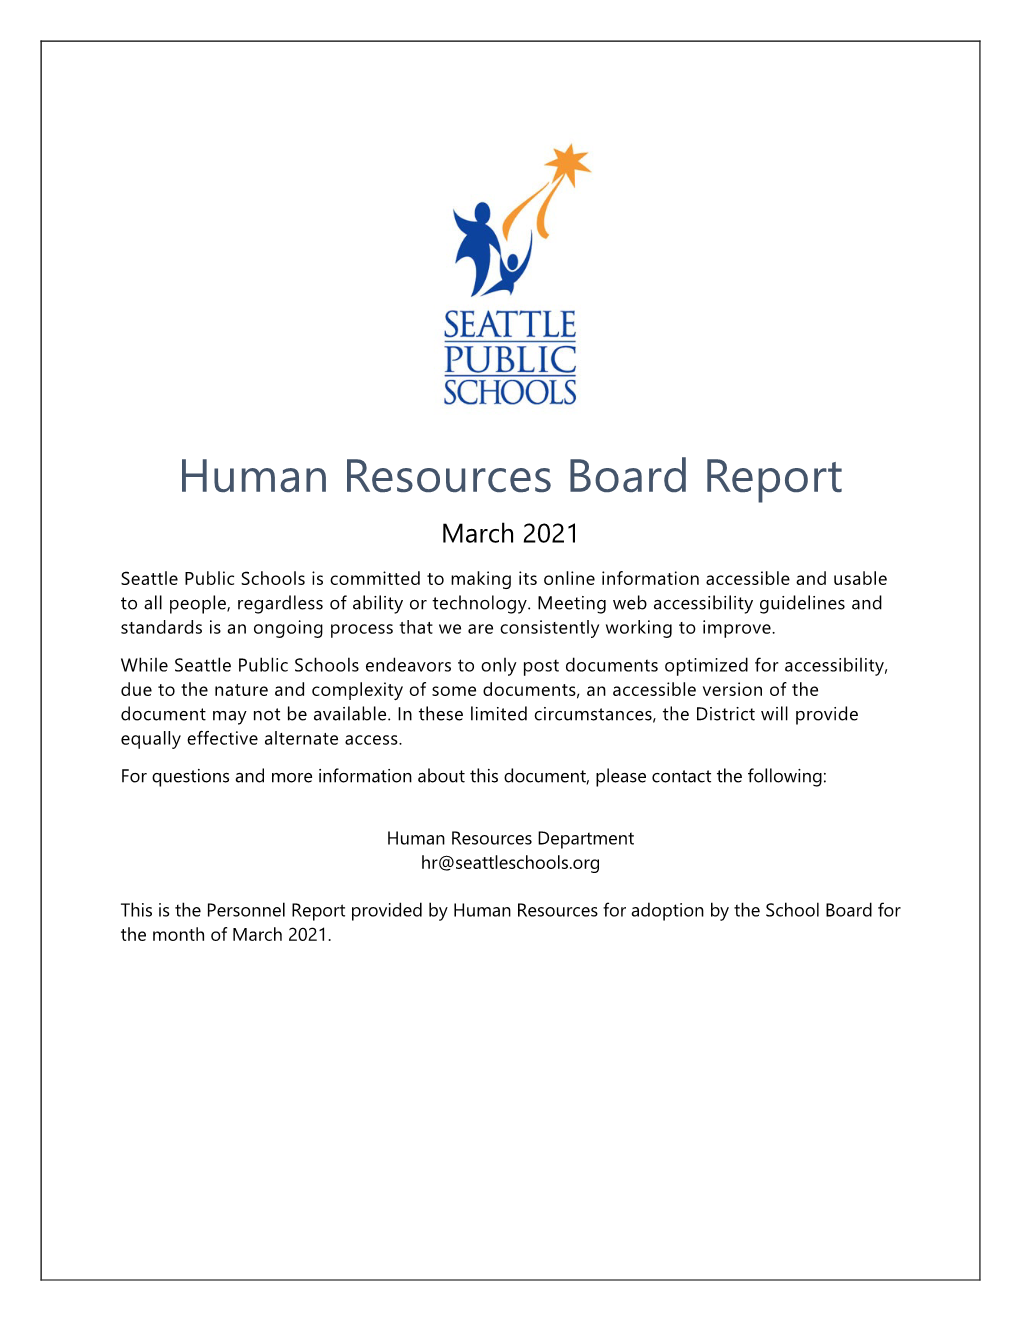 Human Resources Board Report March 2021